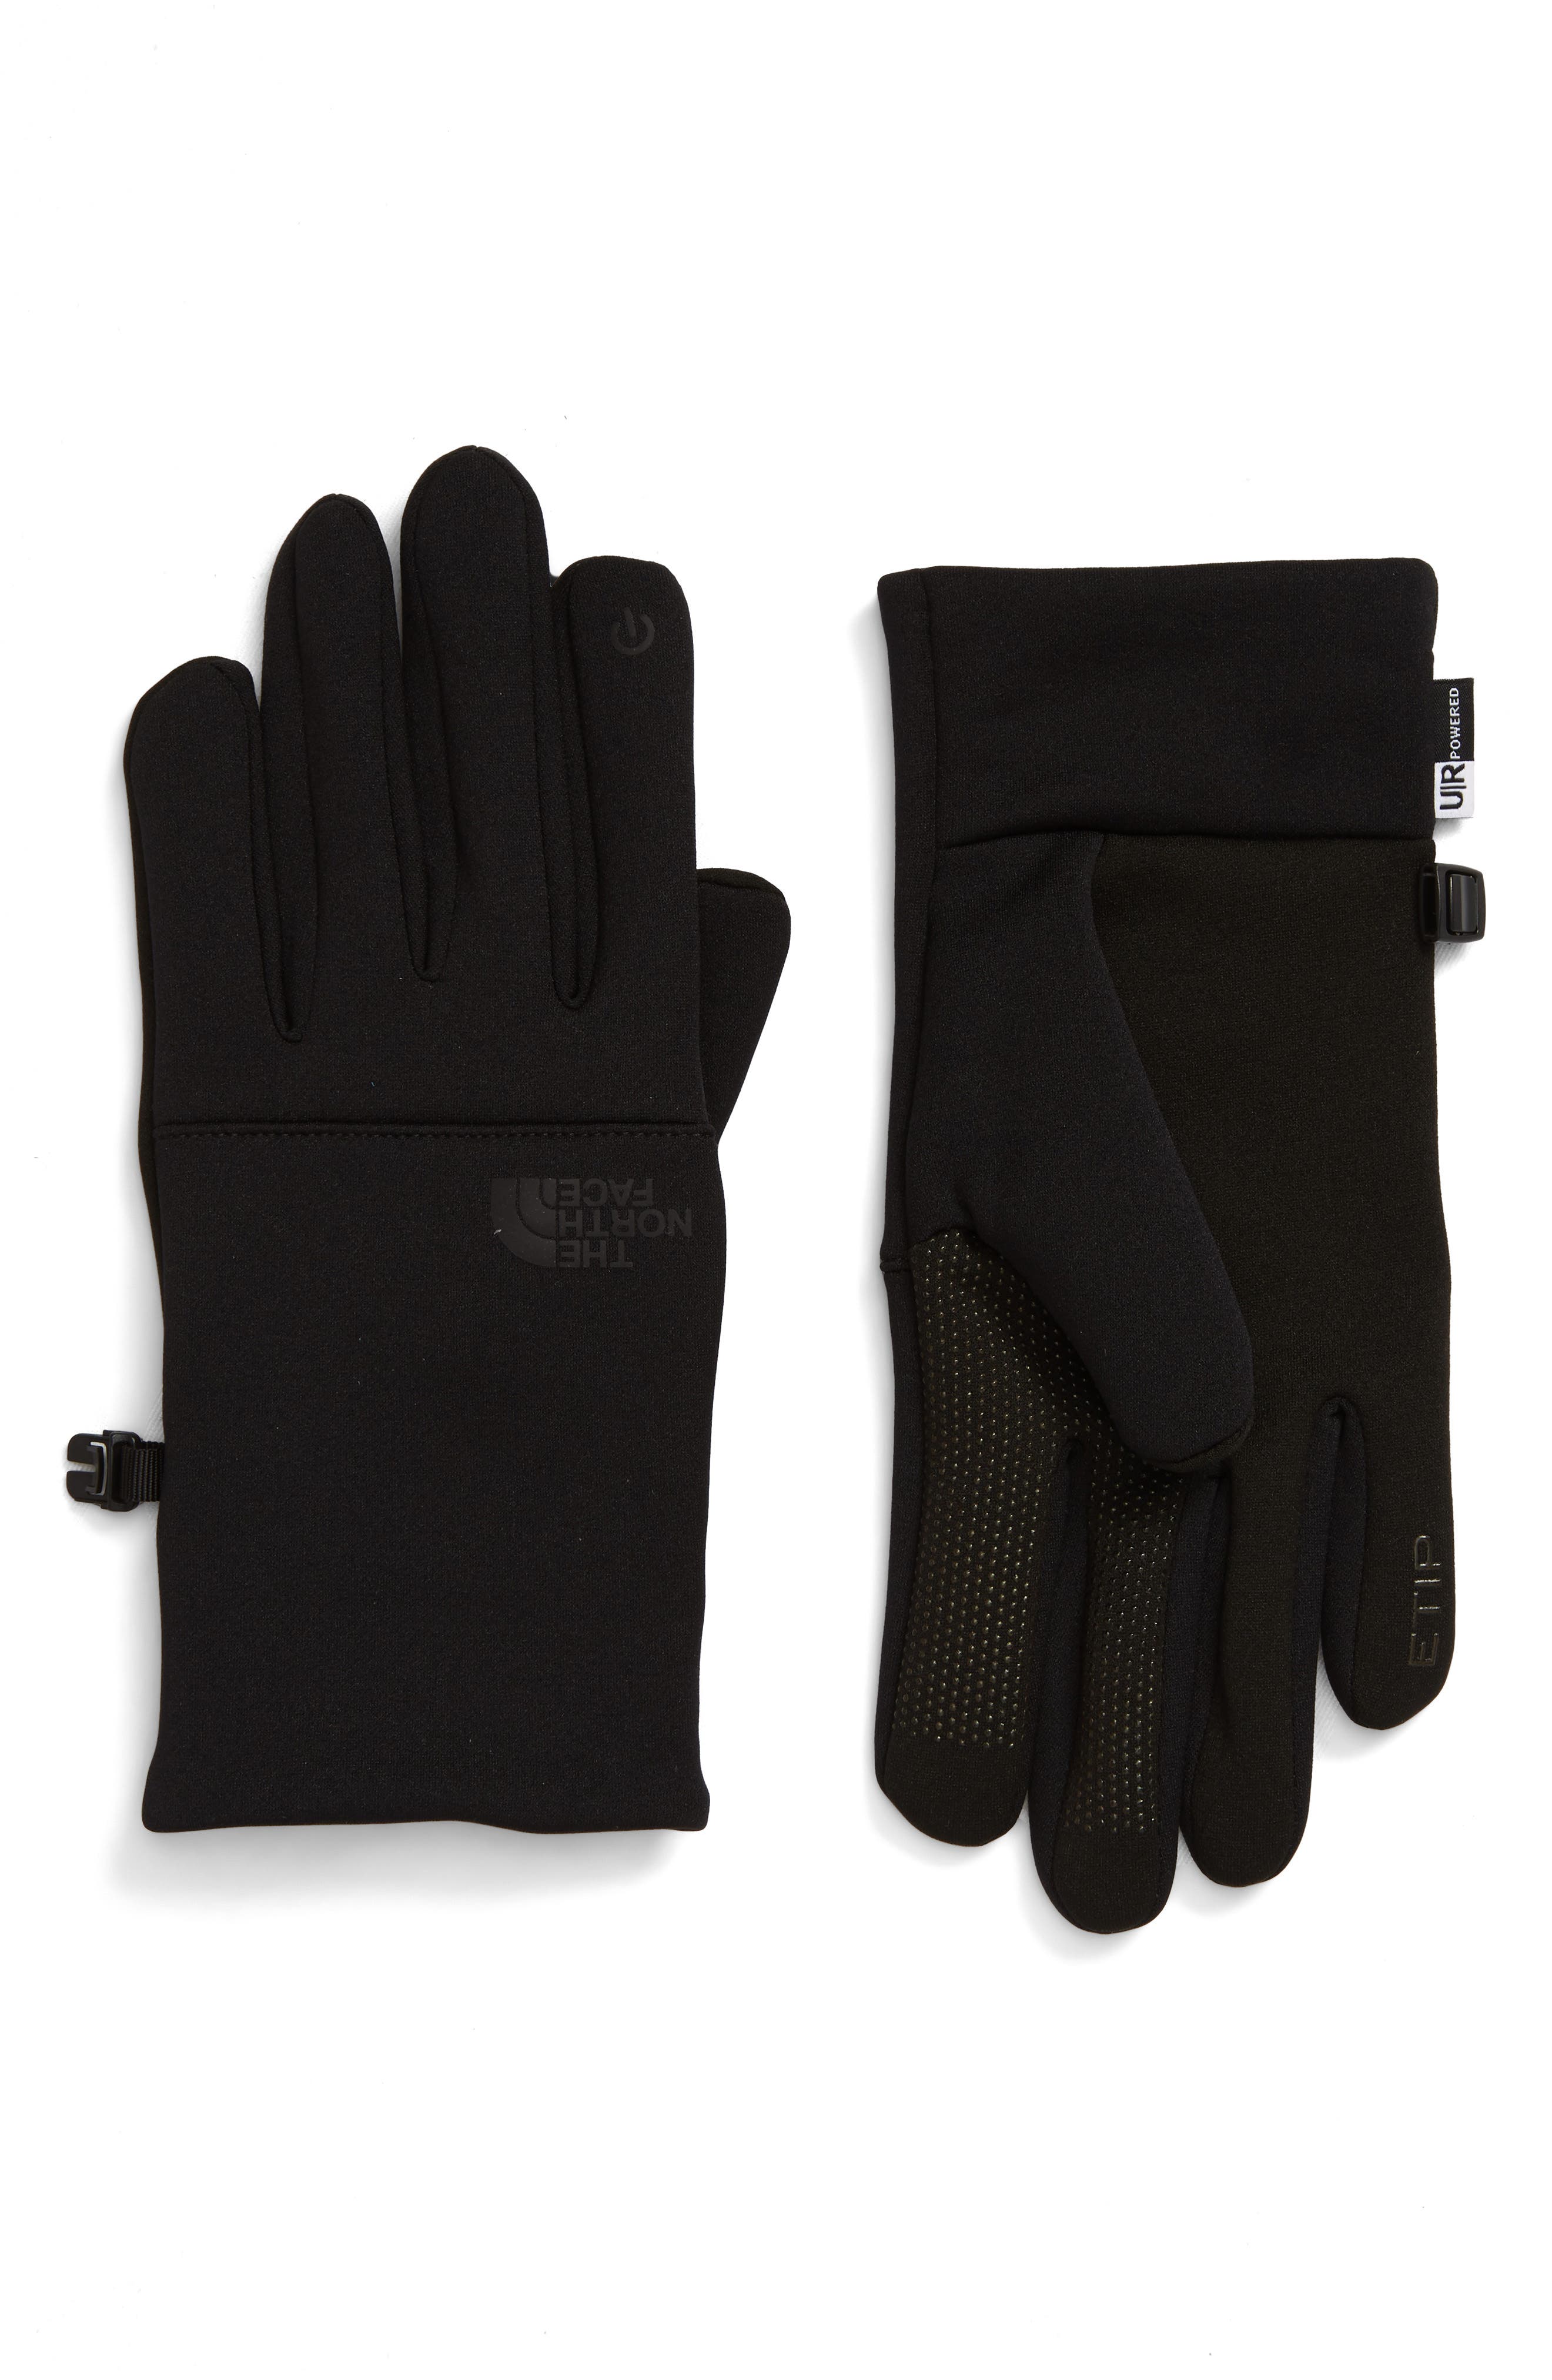 north face commuter glove